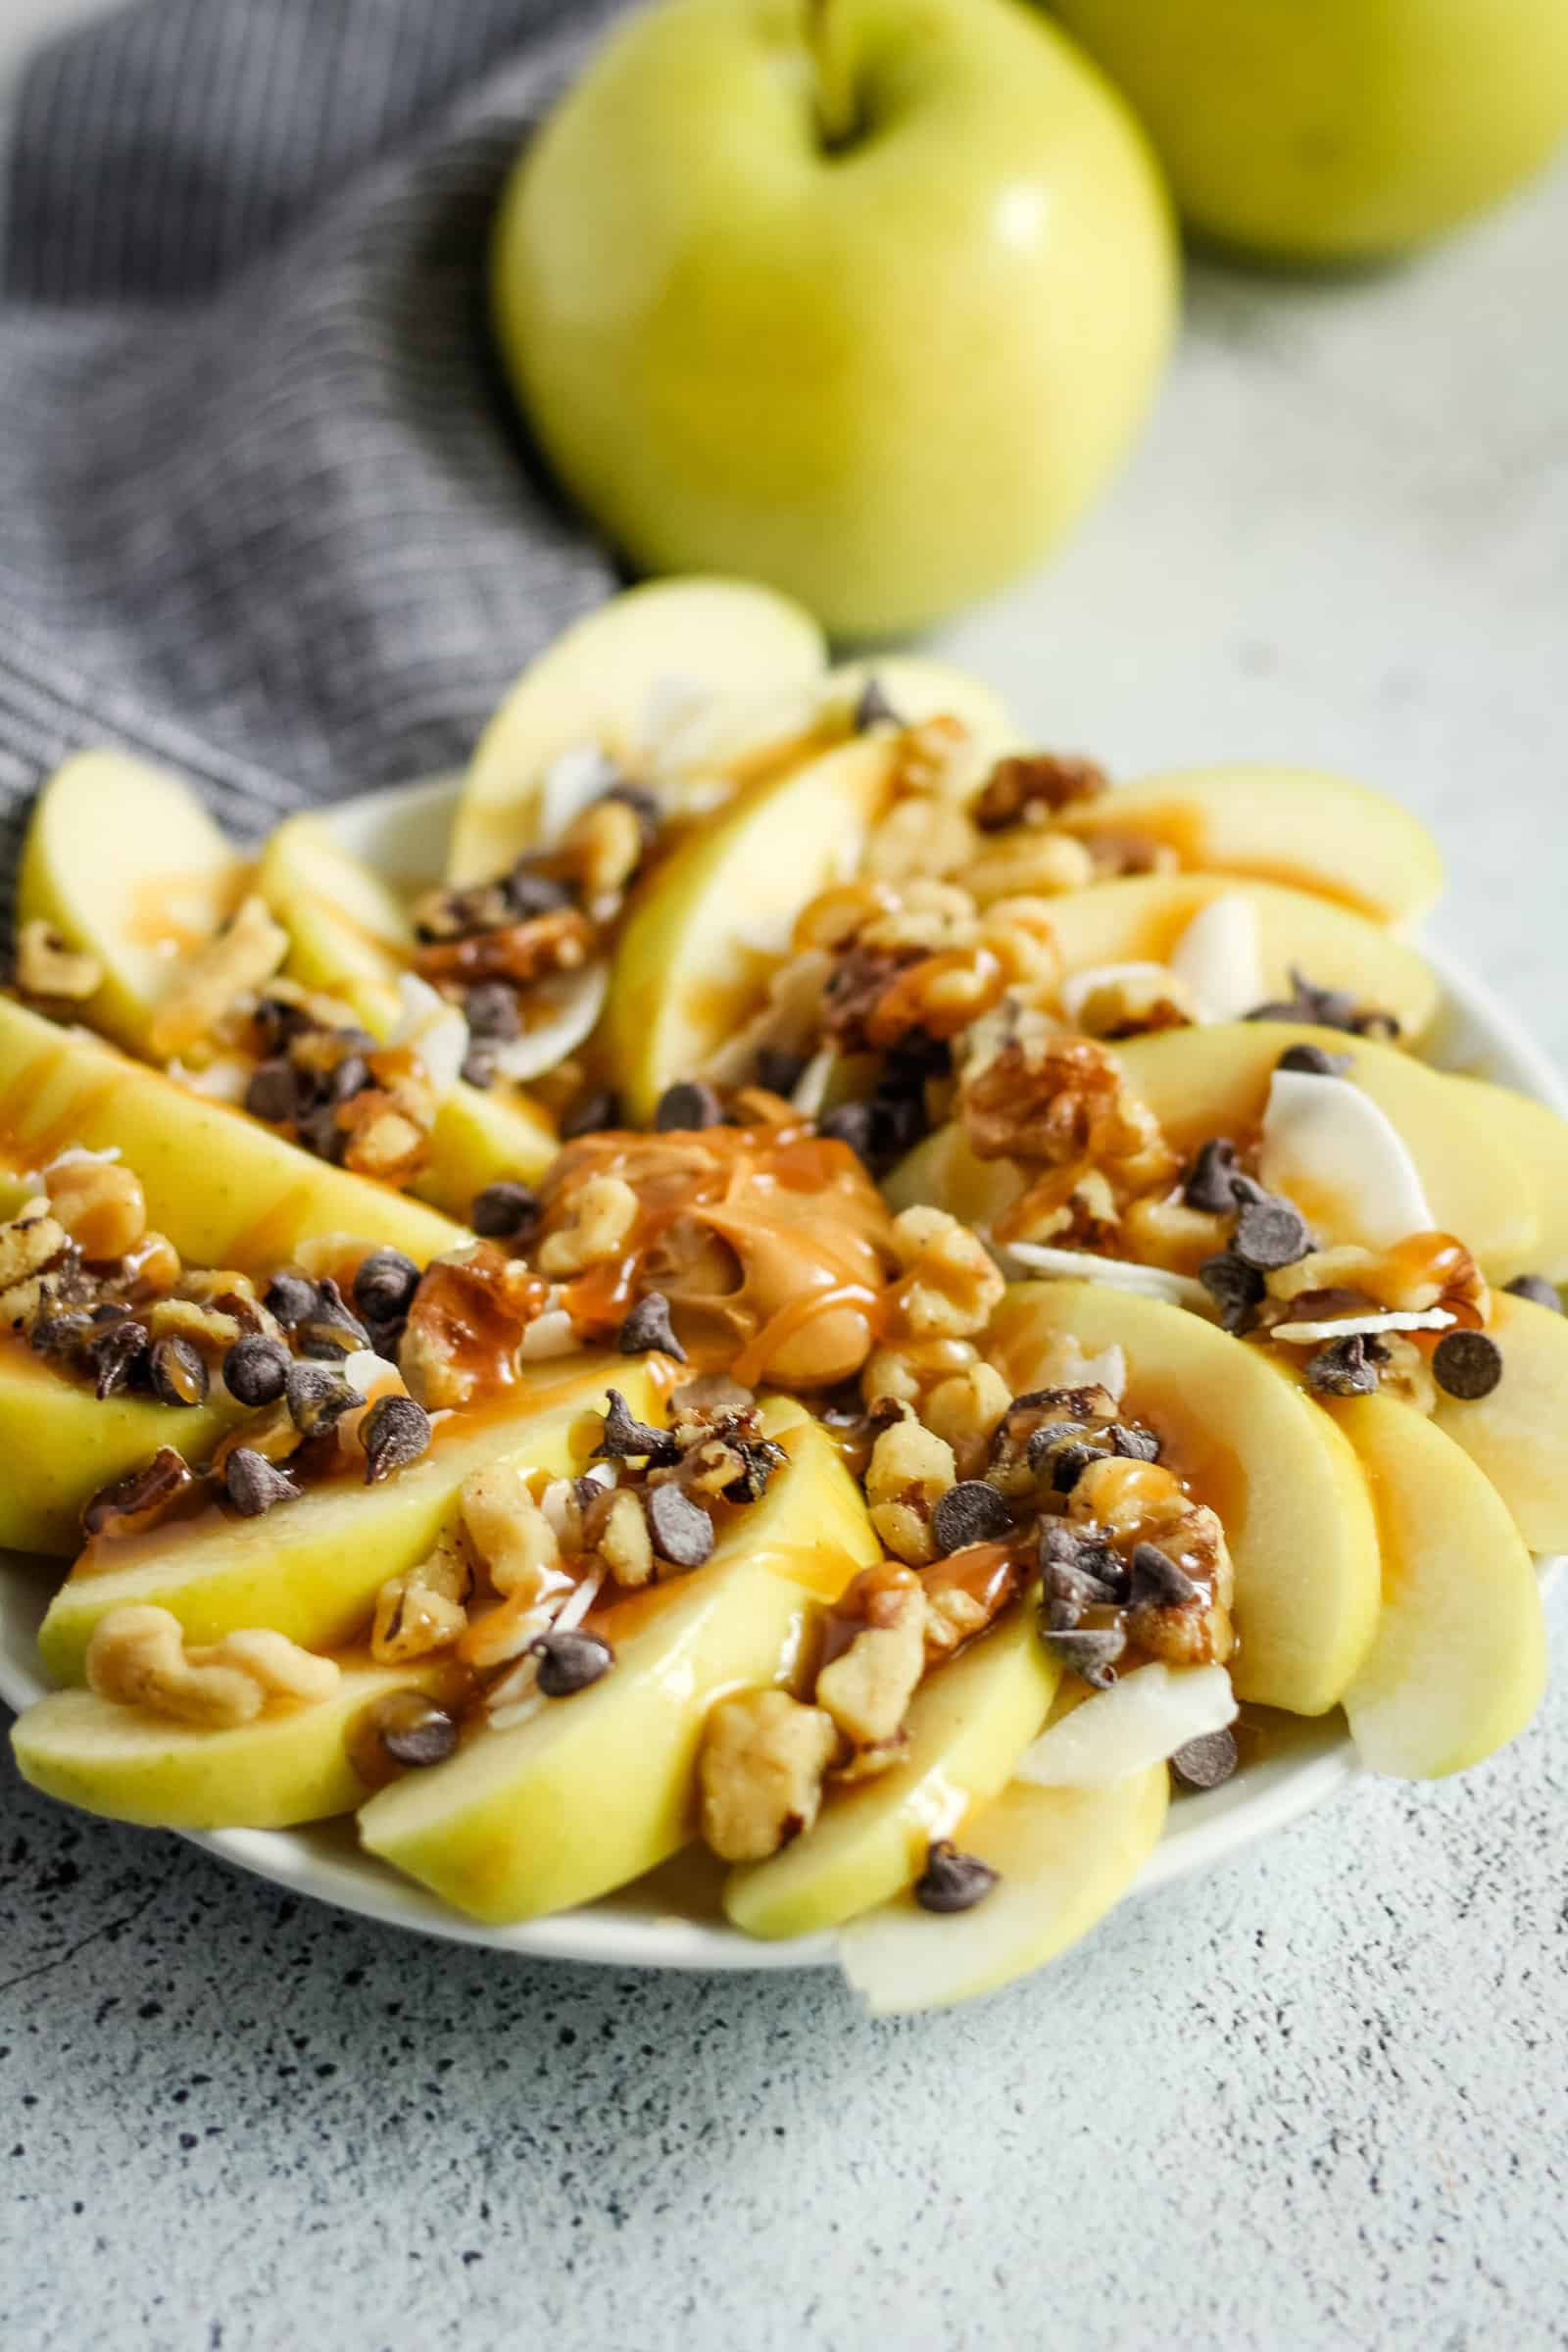 Simple Snacks for Athletes | Learn how to properly fuel your workouts and nourish your body with these spots nutrition tips. Plus, grab an easy recipe for Loaded Apple Nachos